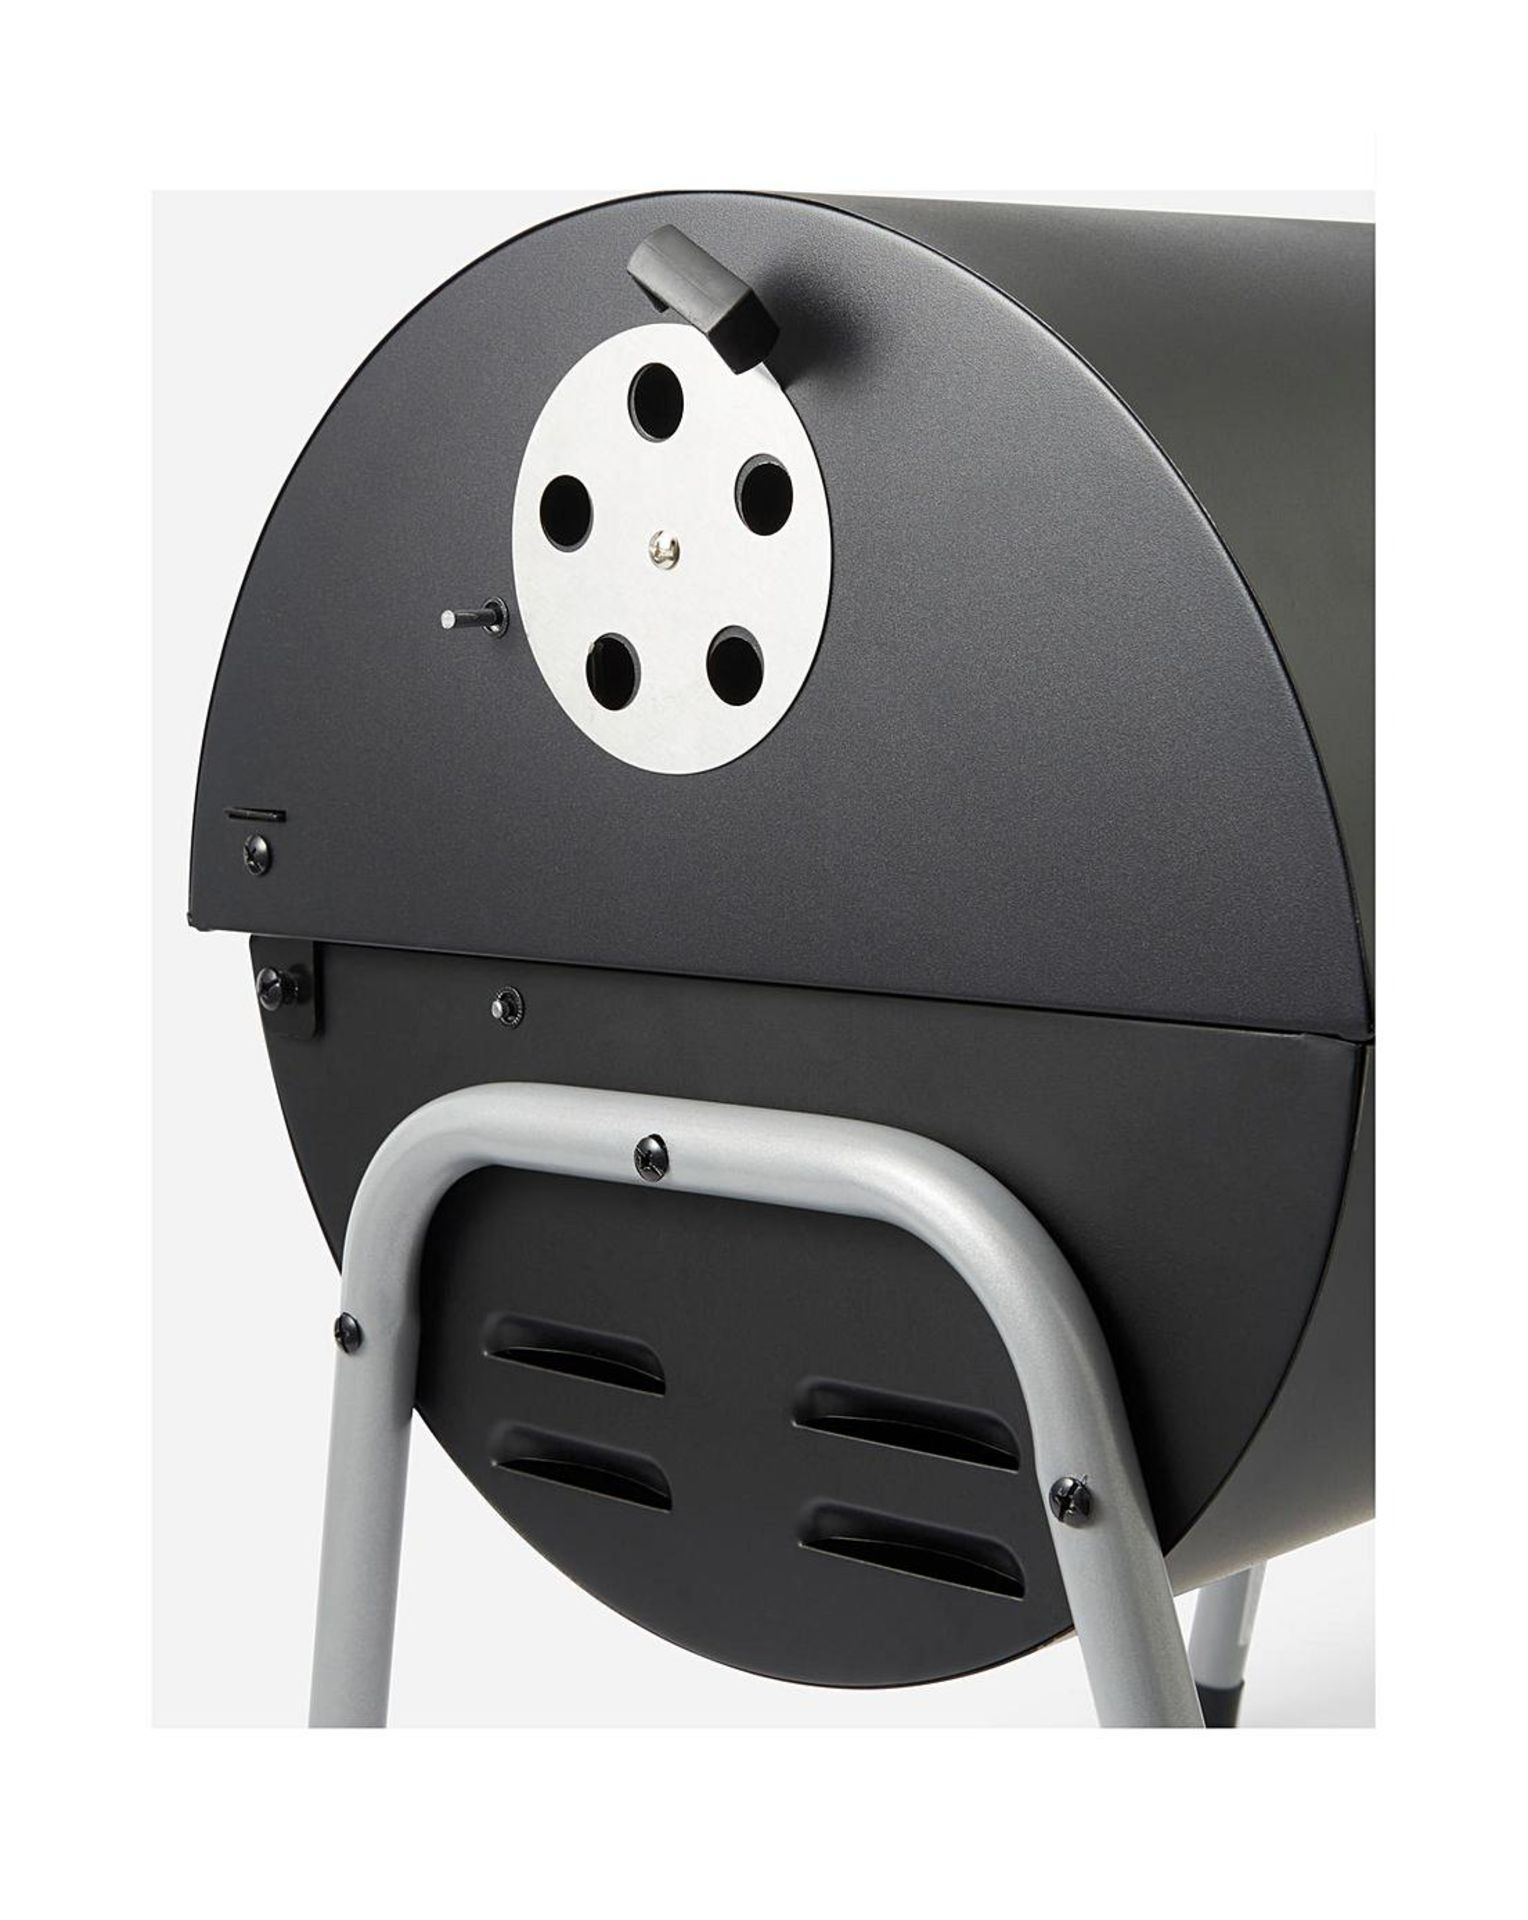 TRADE LOT 12x BRAND NEW Tabletop Oil Drum Barbeque Grill. RRP £59.99 EACH. Black steel firebowl with - Bild 4 aus 4